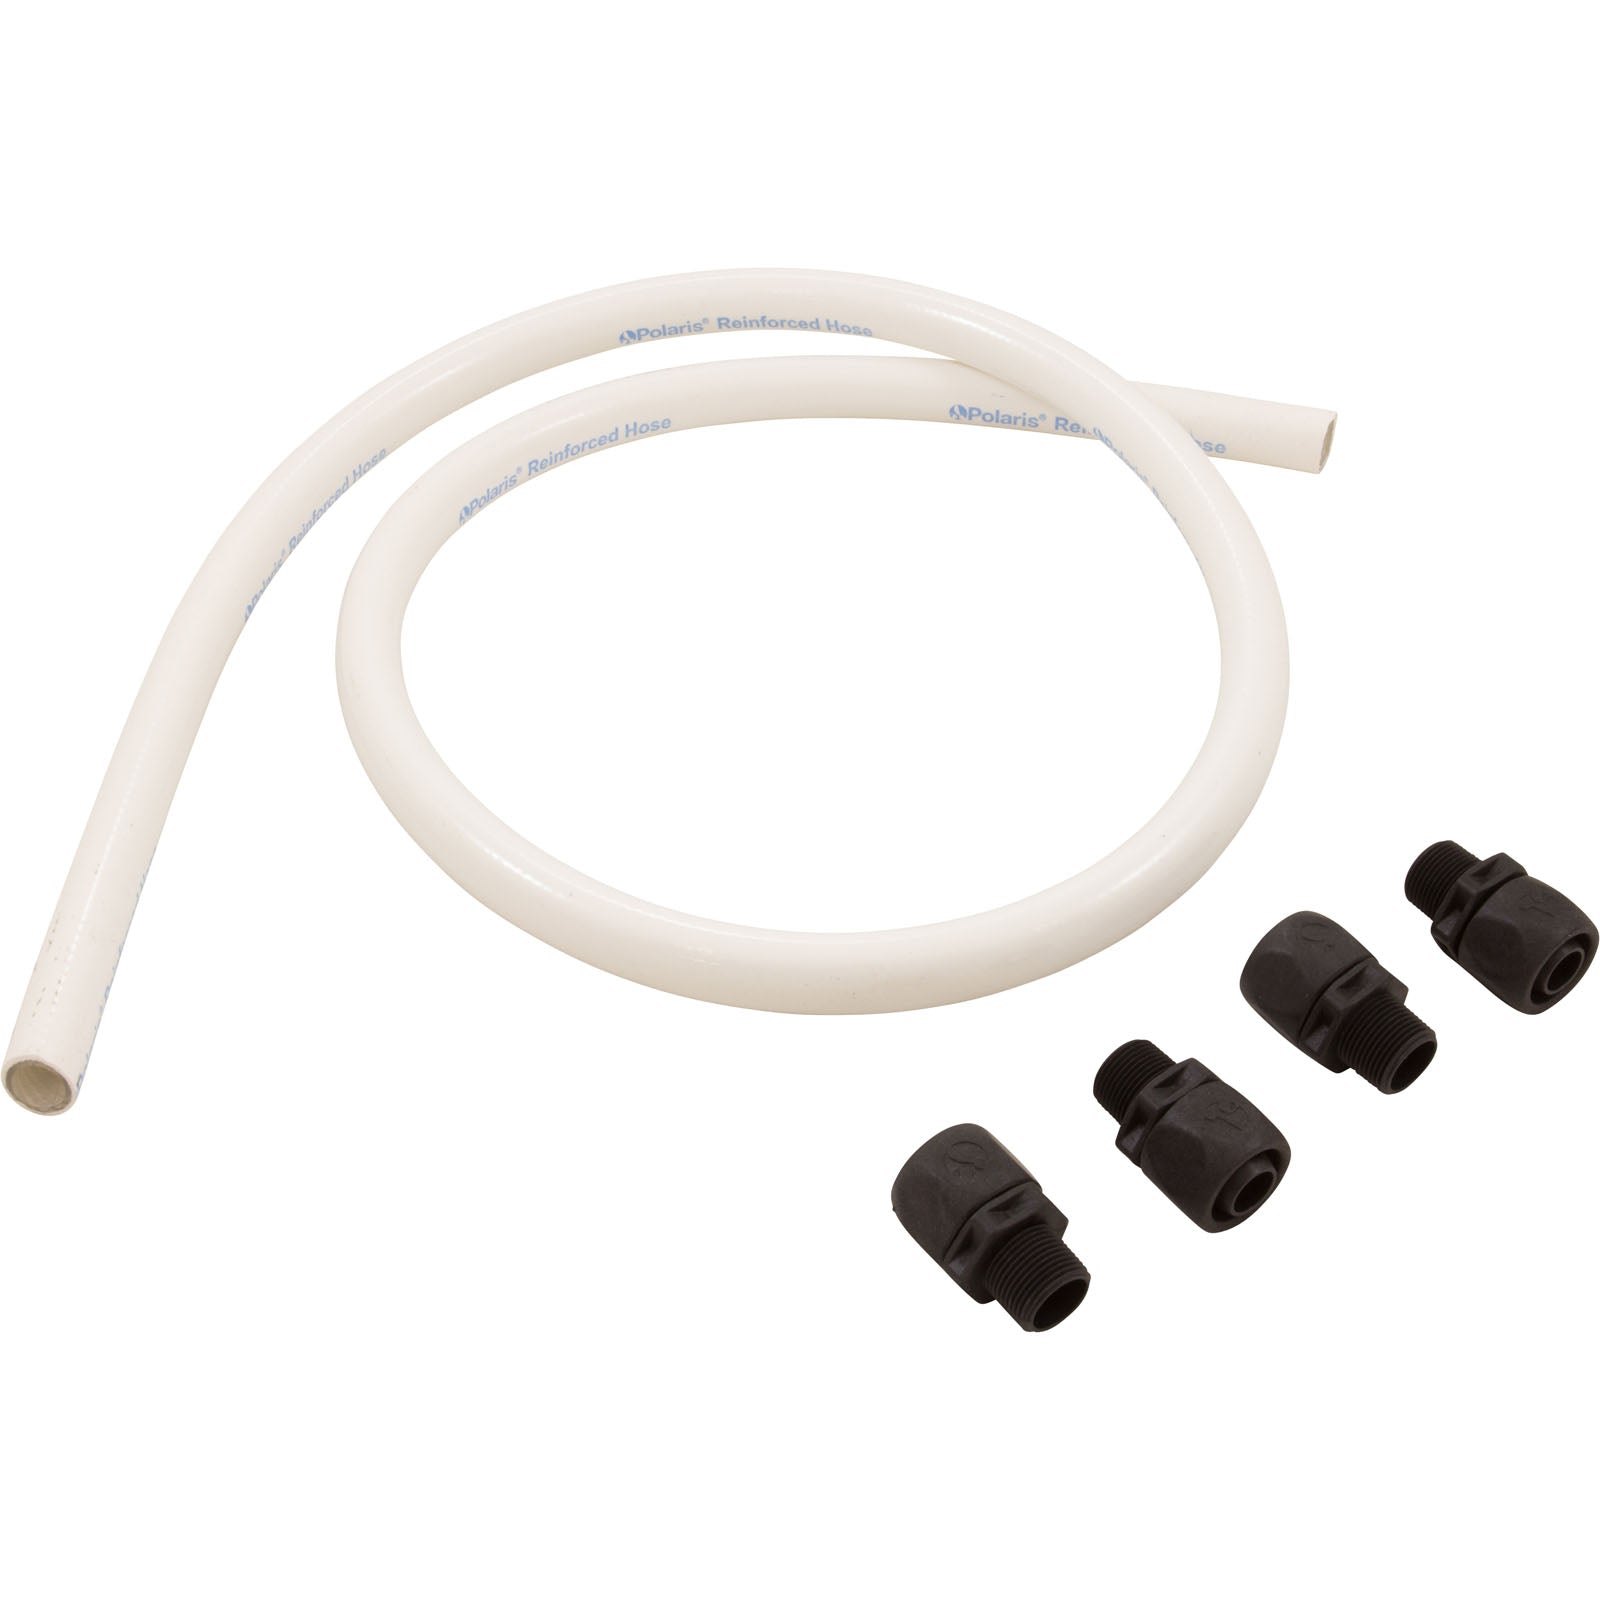 Install Kit, Zodiac Pol Booster Pump, Soft Tube Quick Connect/ R0617100